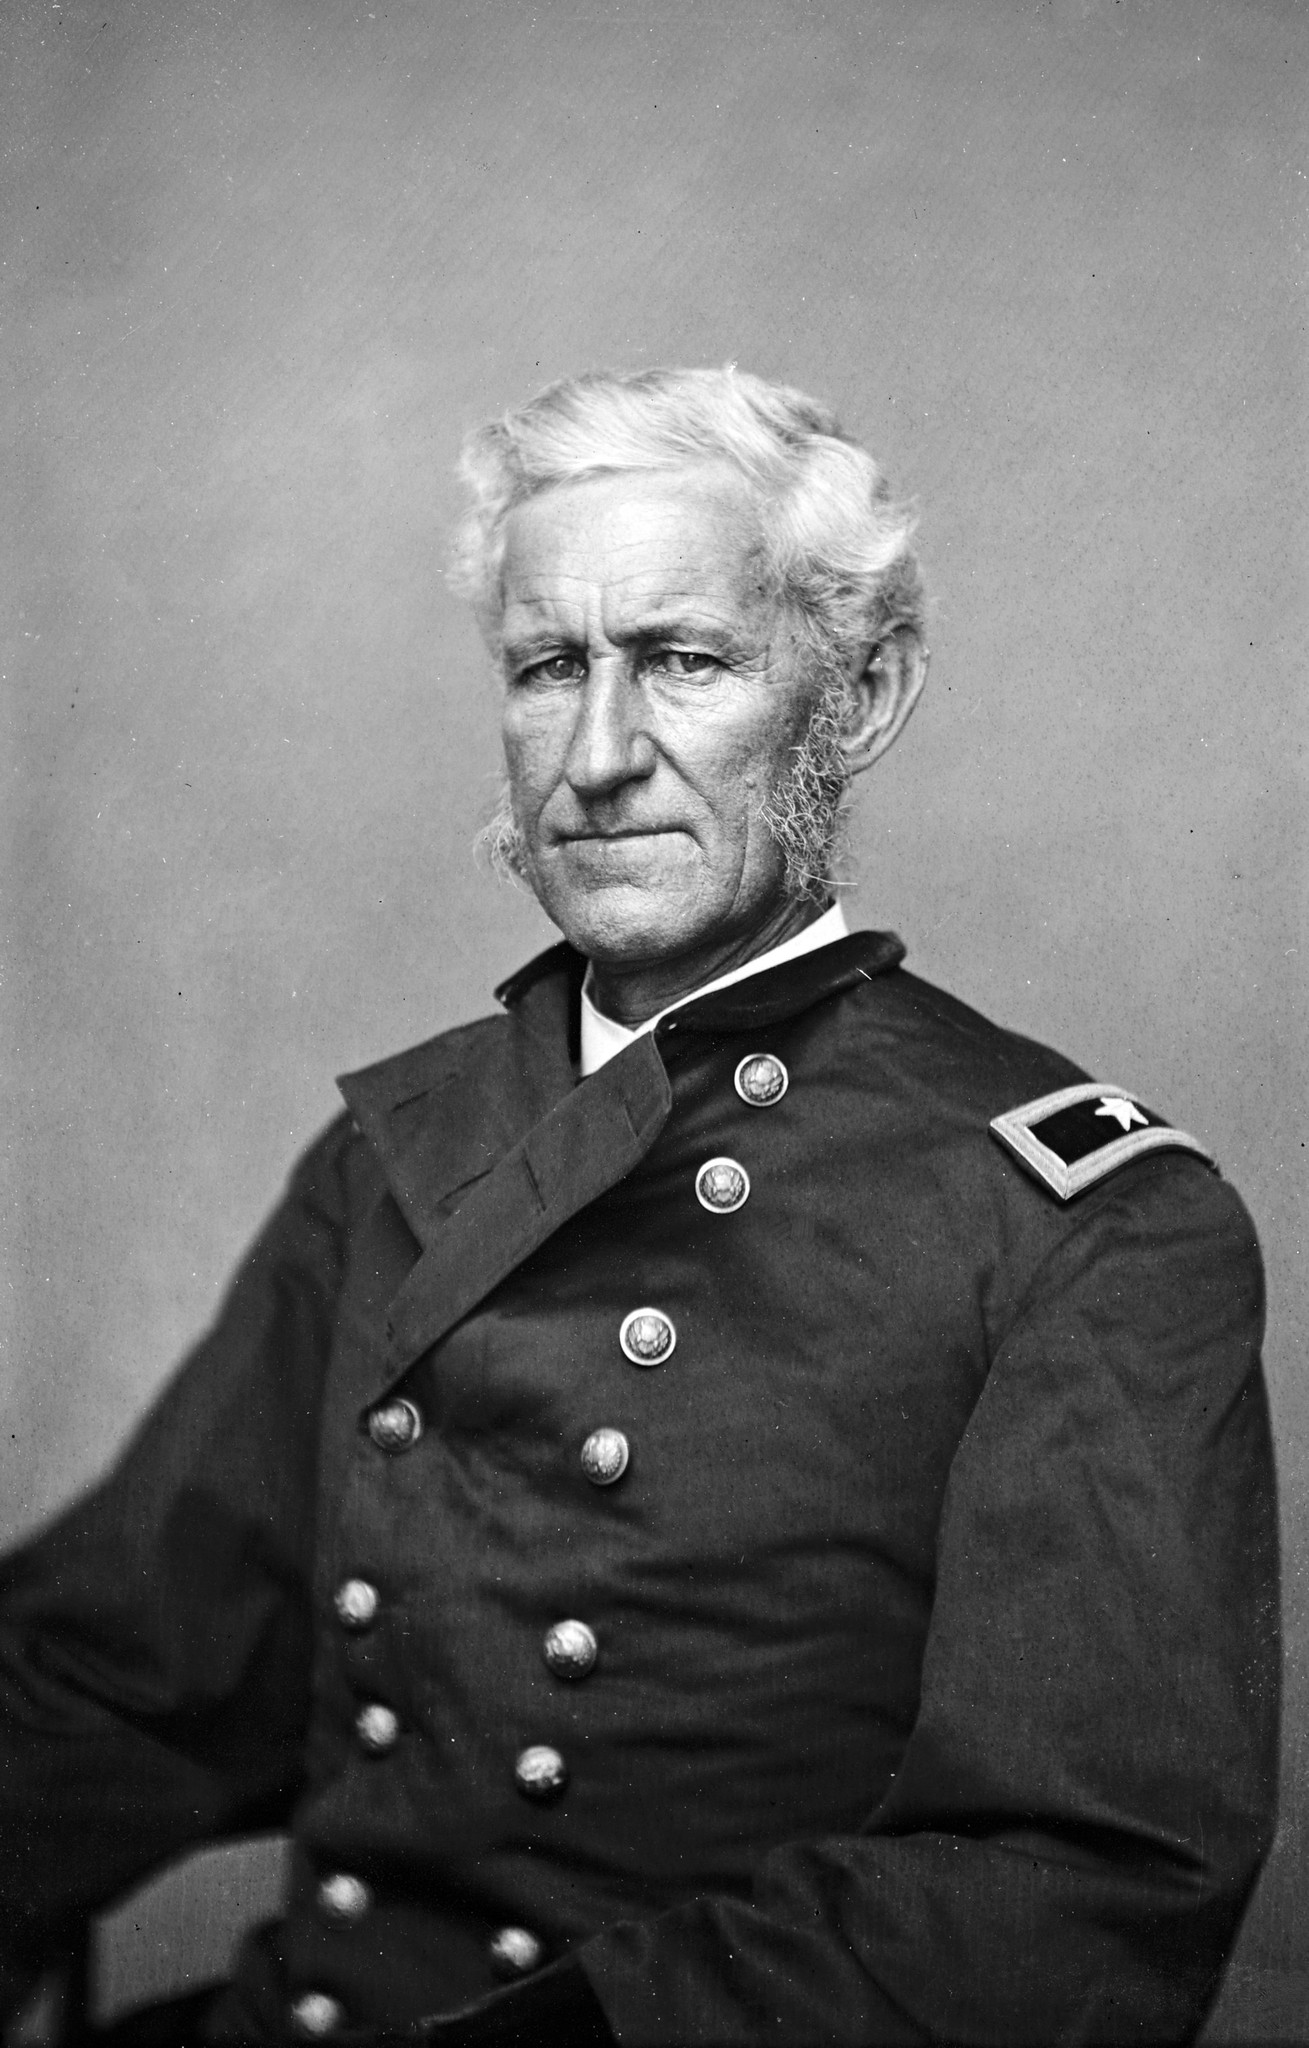 Lorenzo Thomas (October 26, 1804 – March 2, 1875) was a career United States Army officer who was Adjutant General of the Army at the beginning of the American Civil War.